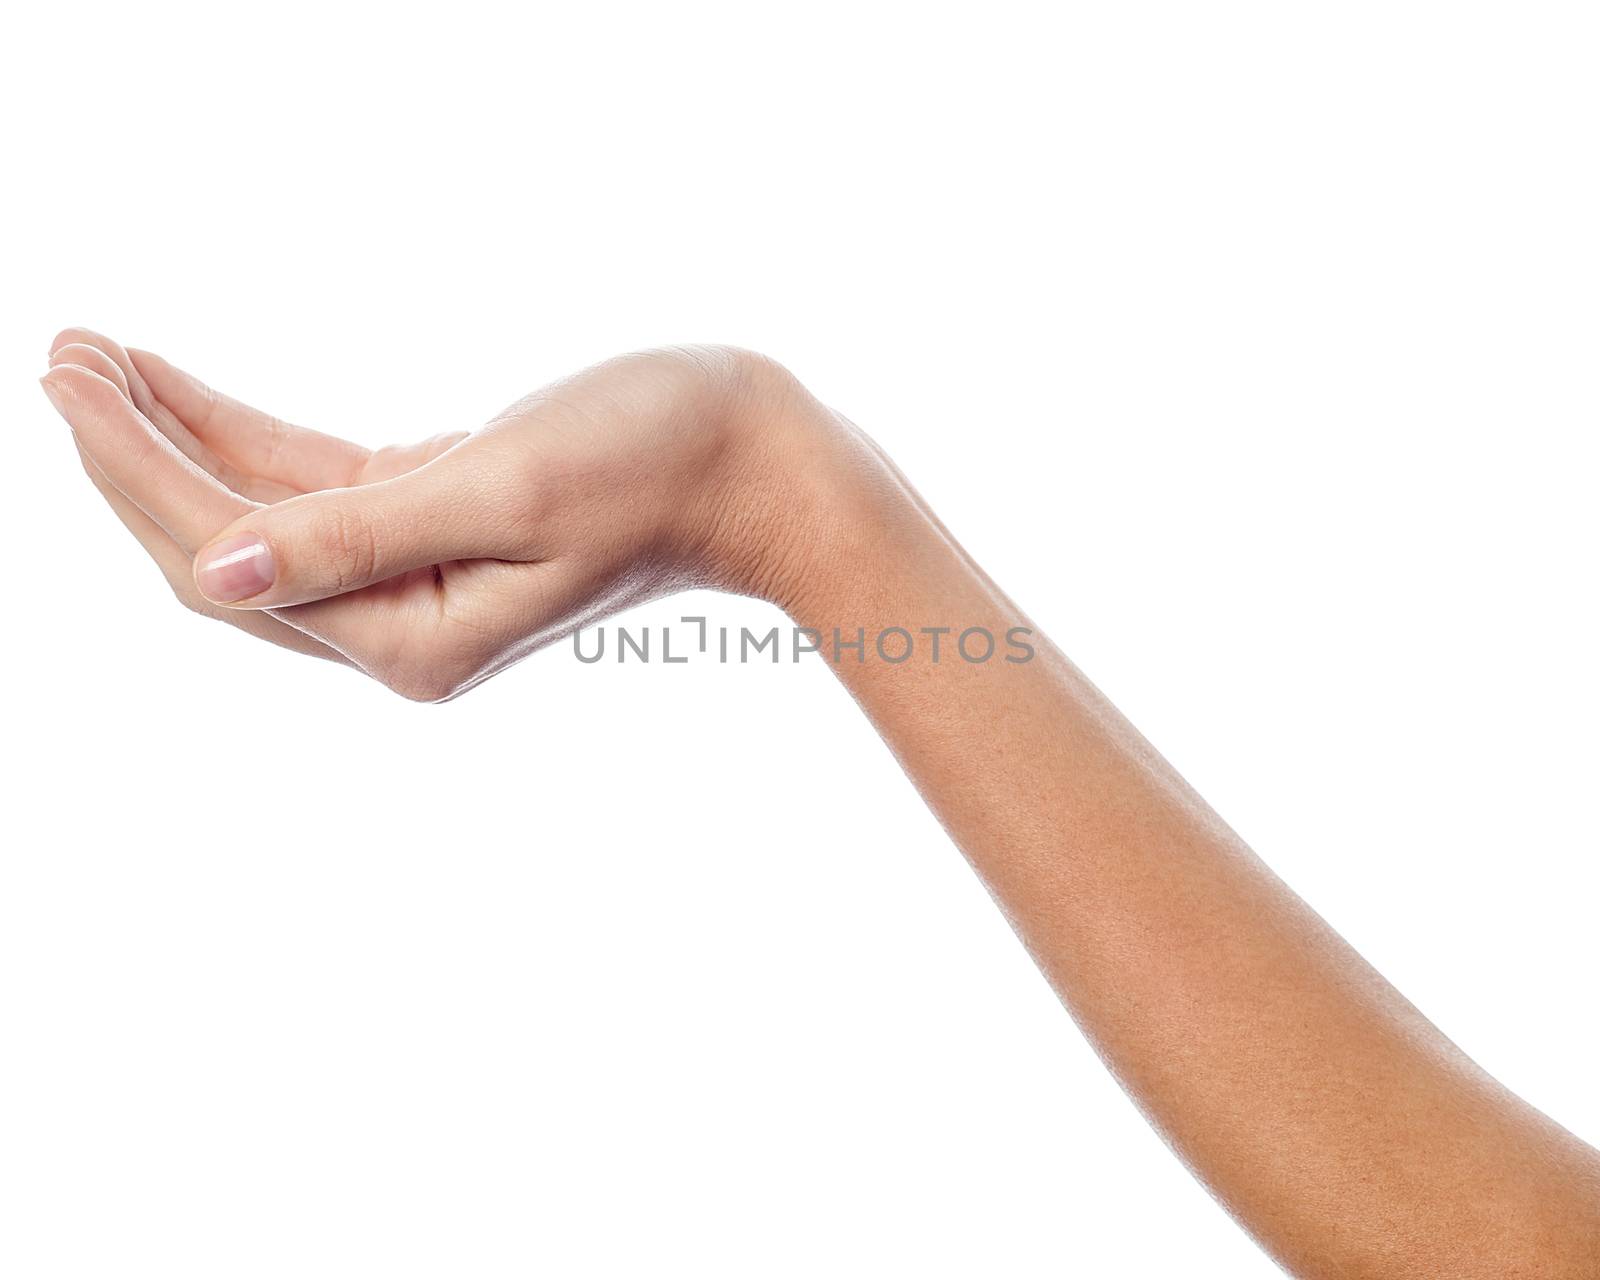 Female hand in holding gesture